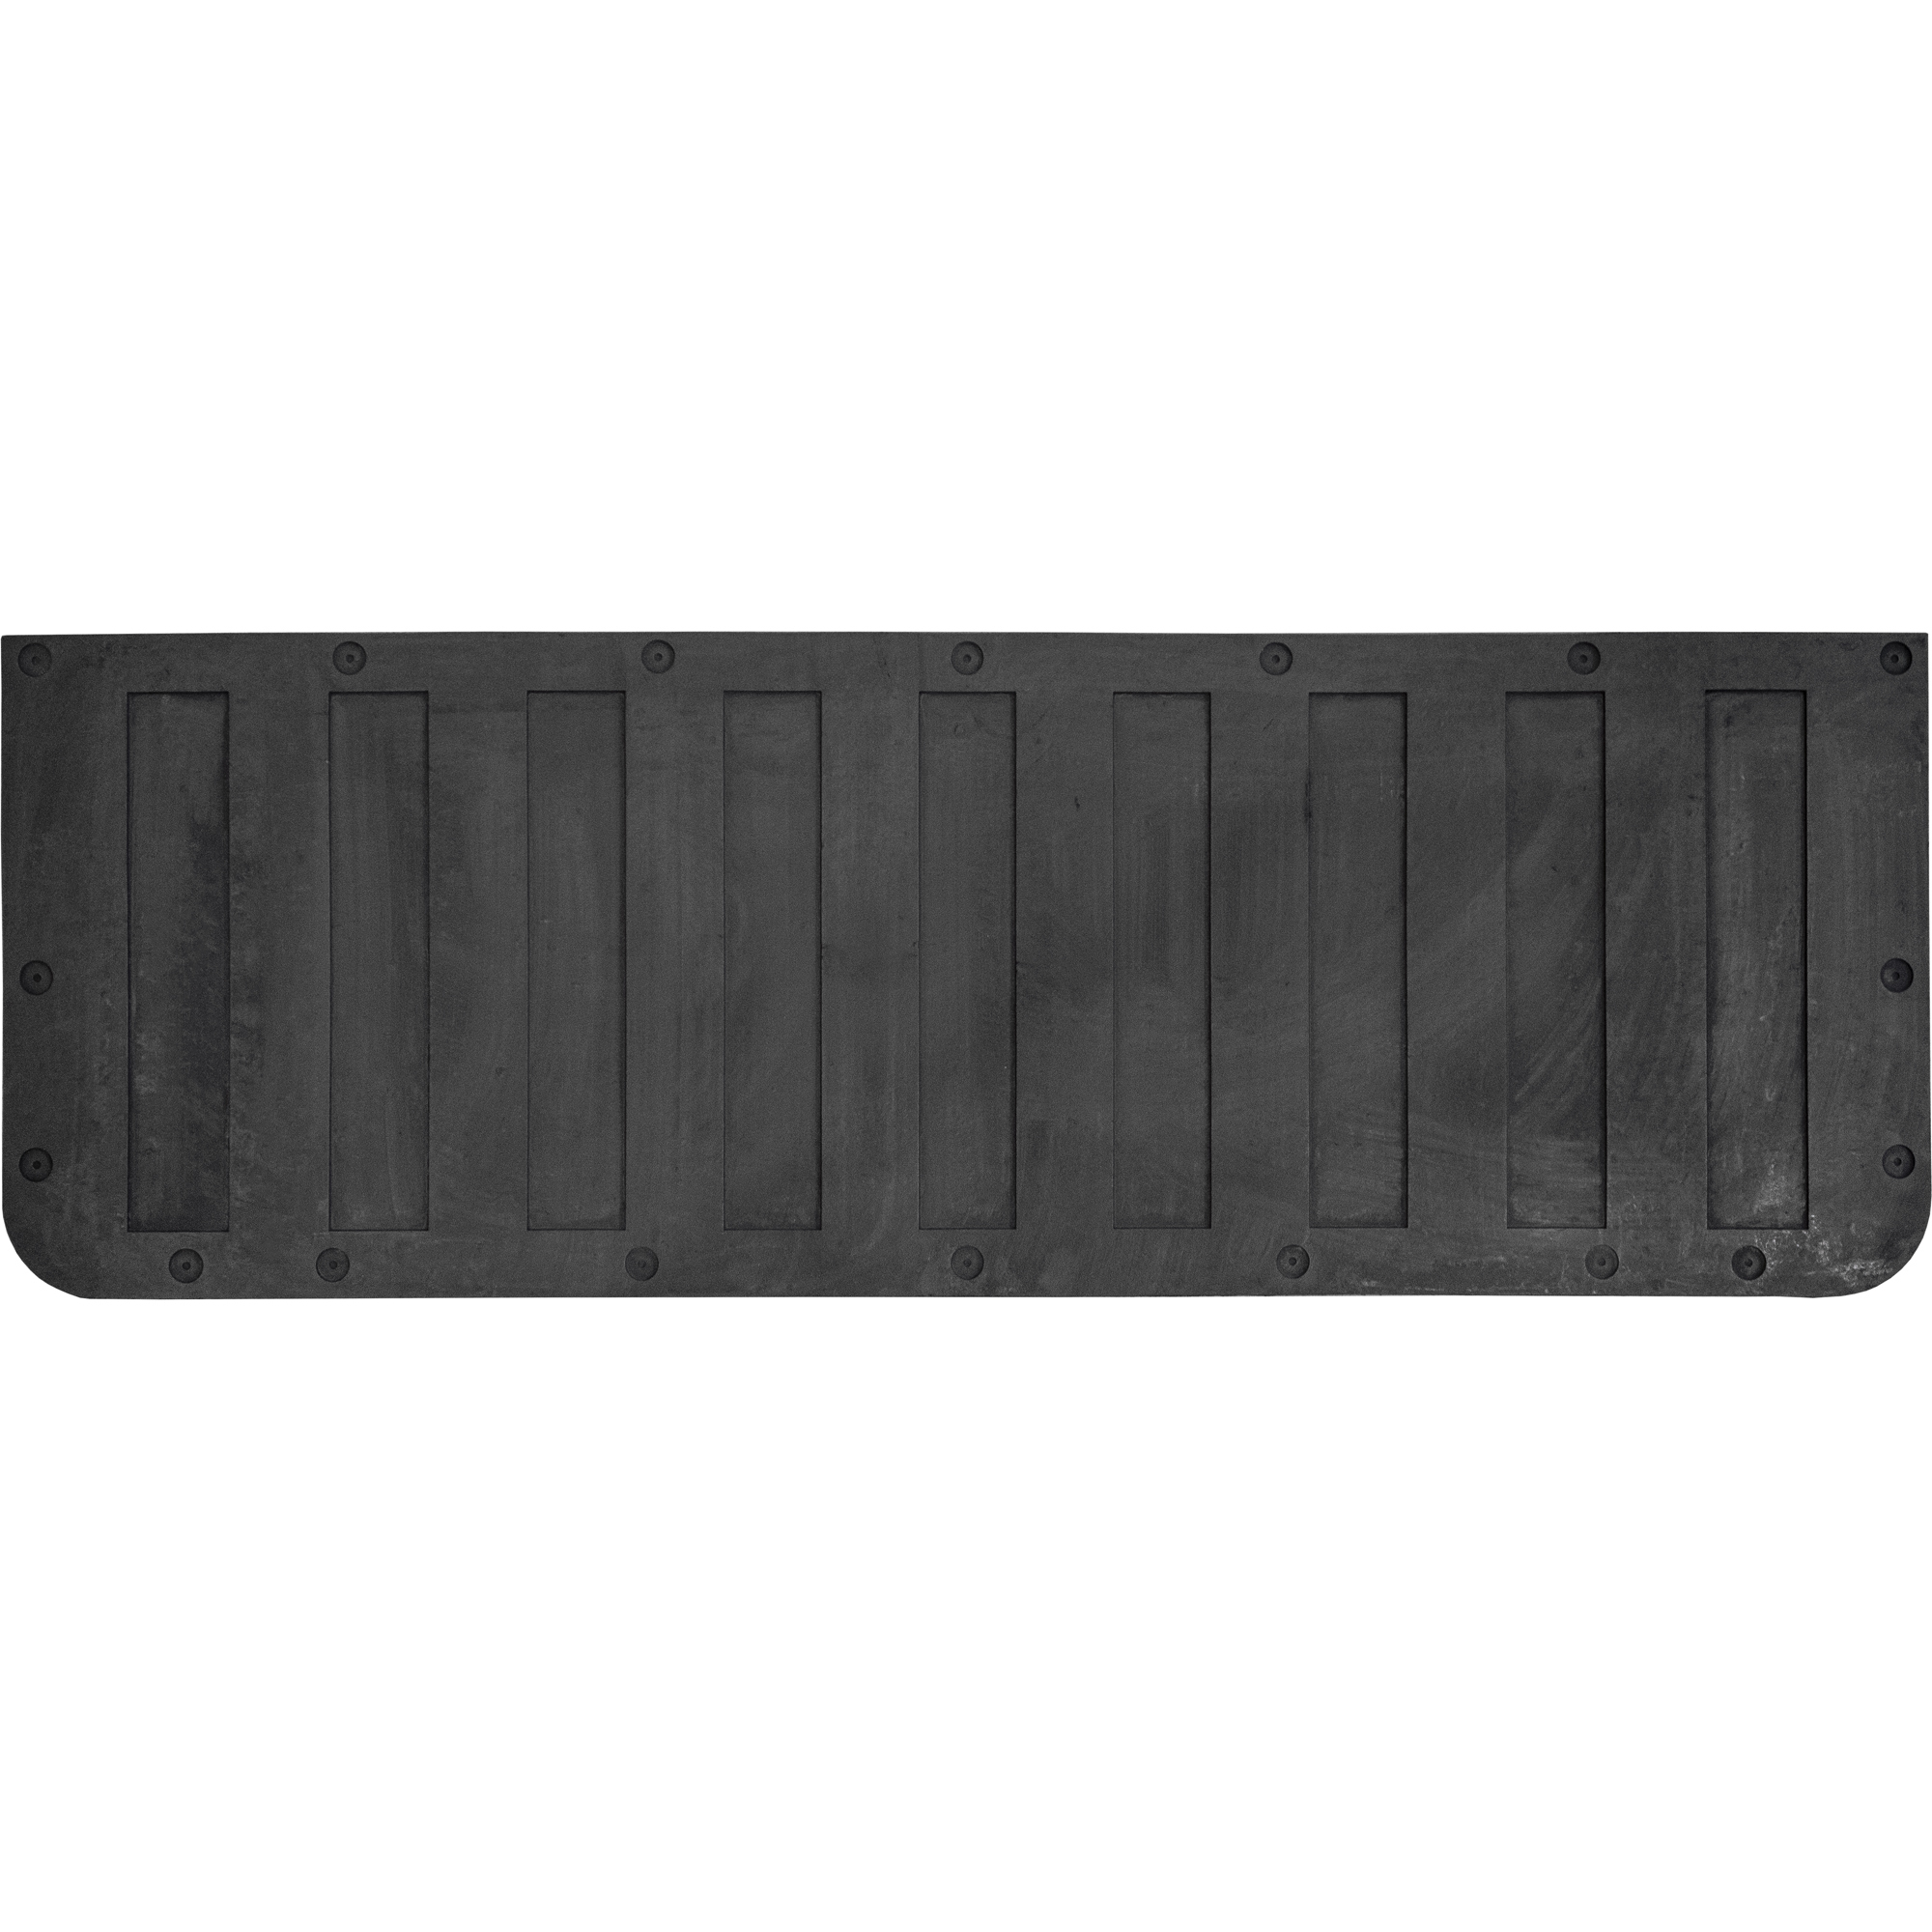 Boomerang Rubber, Chevy/GMC Truck Tailgate Mat, Short Bed, Primary Color Black, Model TM L BAGGED